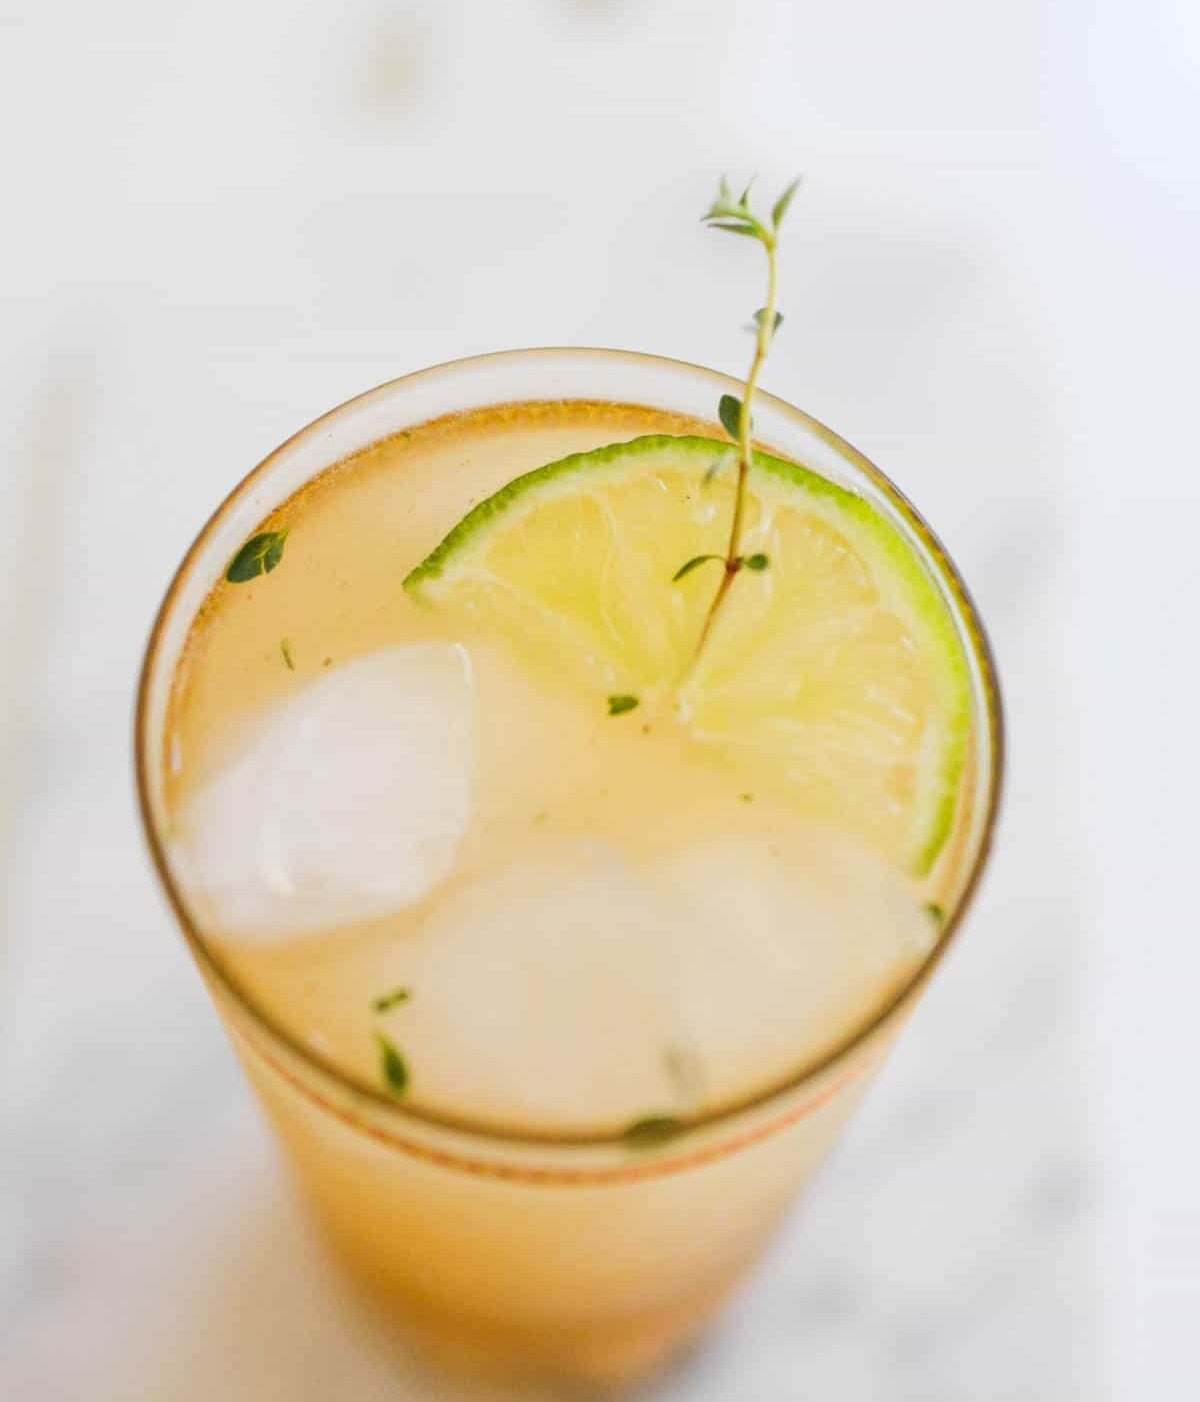 A tall glass of iced chardonnay and pear cocktail, garnished with a thyme sprig